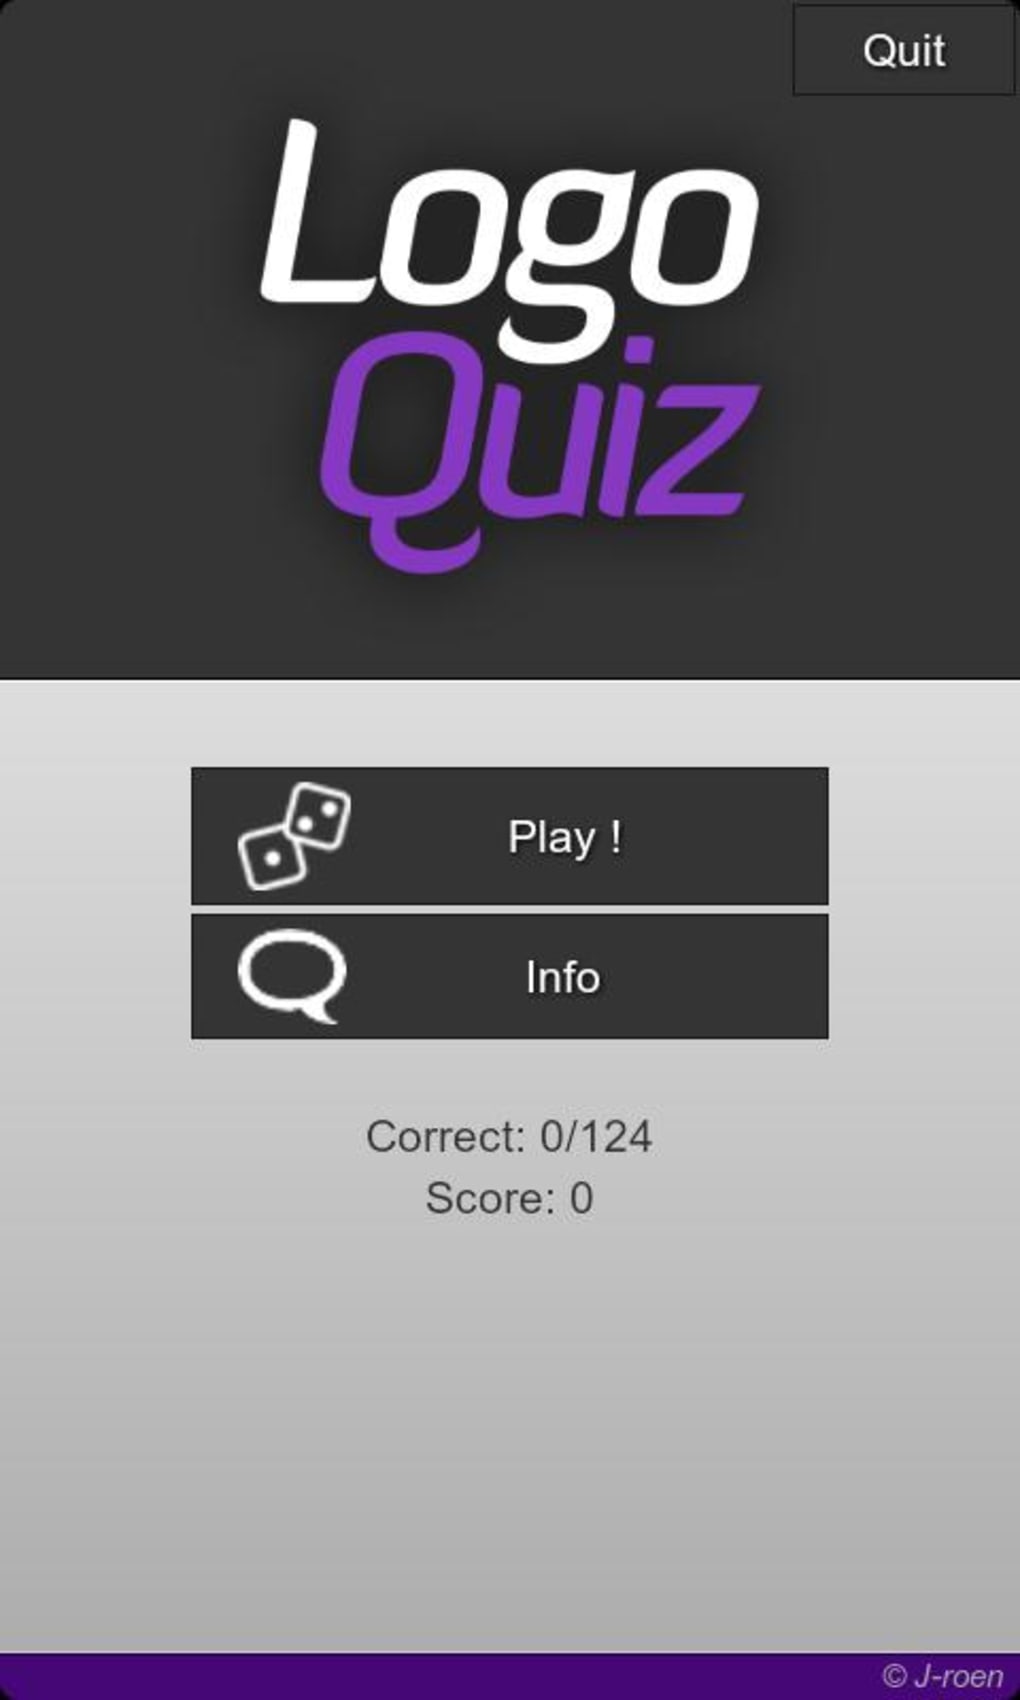 Genio Quiz rs Apk Download for Android- Latest version 1.0.1-  net.lol.gqrs